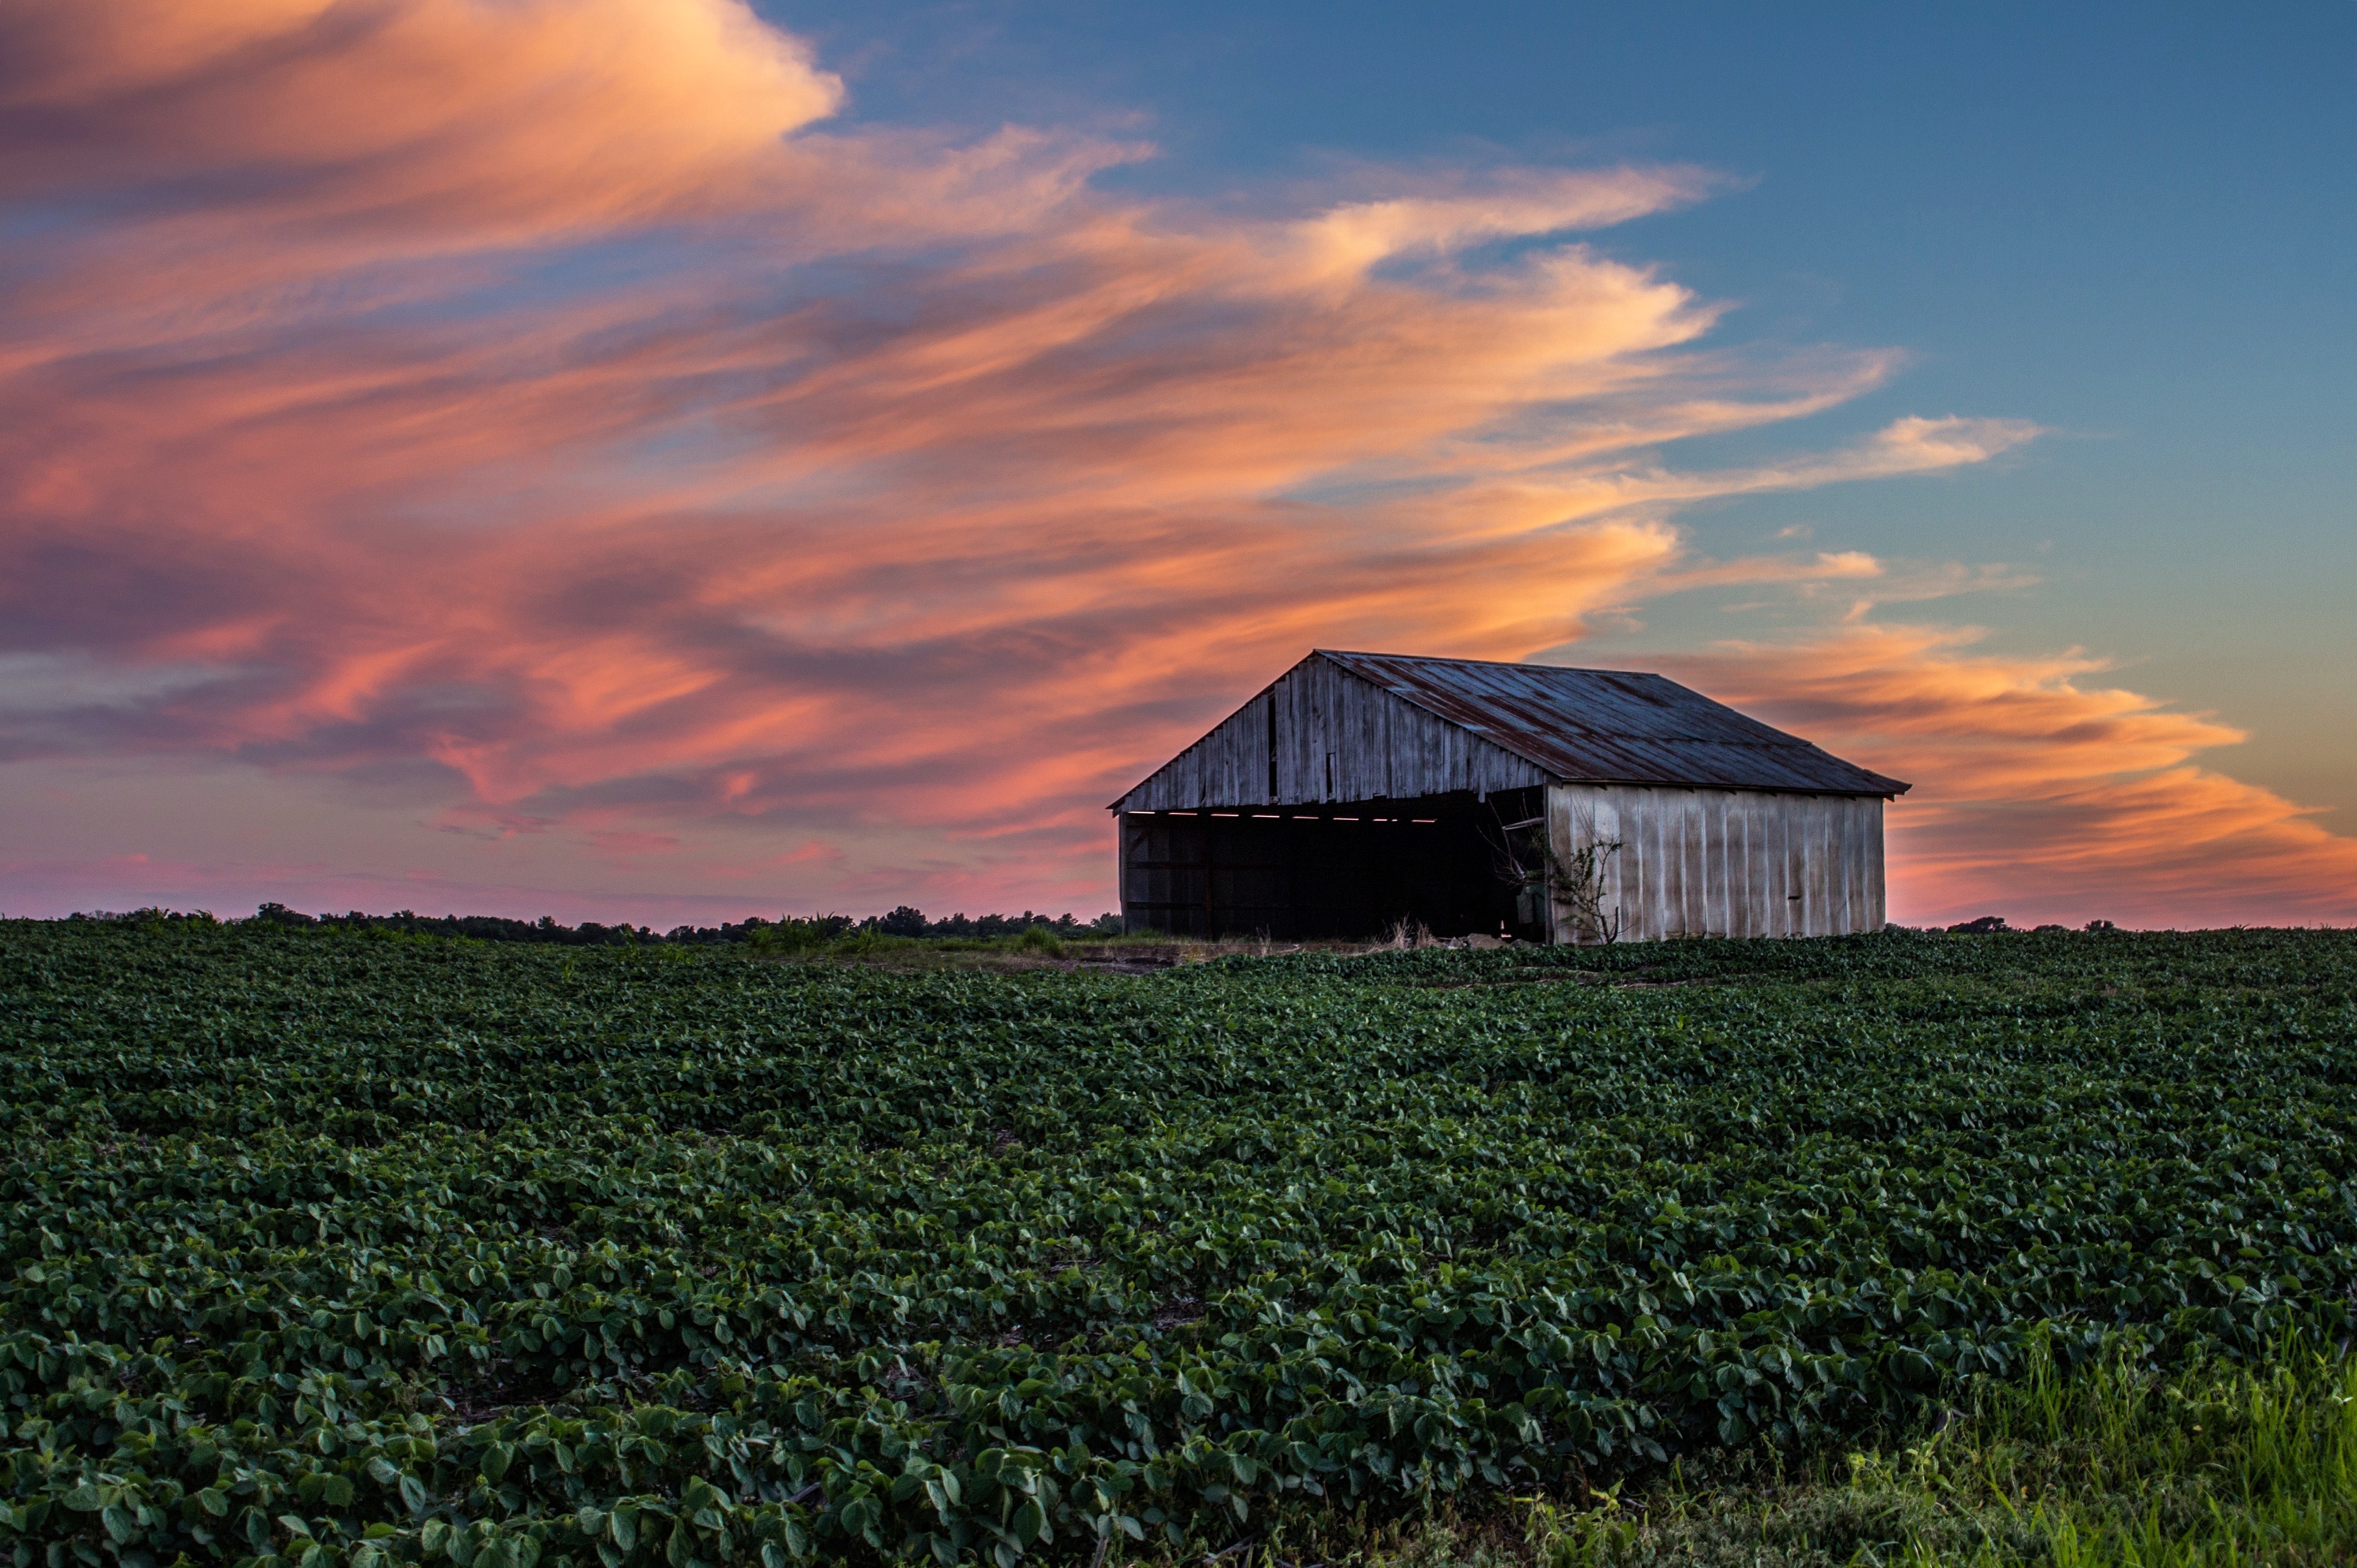 Vivid sunset, partially dilapidated barn, and soybeans in the foreground.